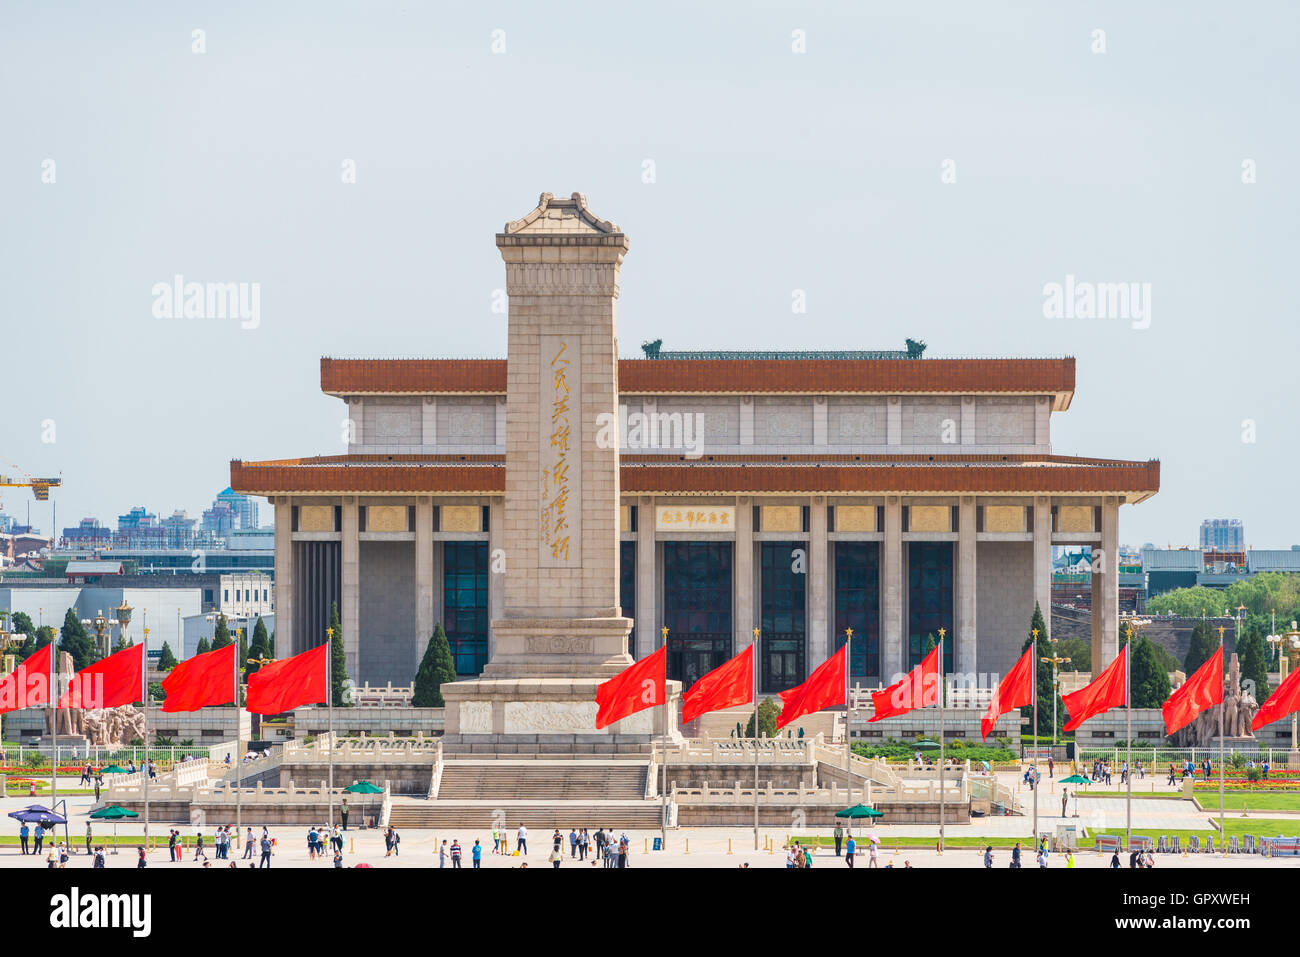 Tiananmen Square, one of the world's largest city square, China landmark location, The Gate of Heavenly Peace in Beijing China Stock Photo